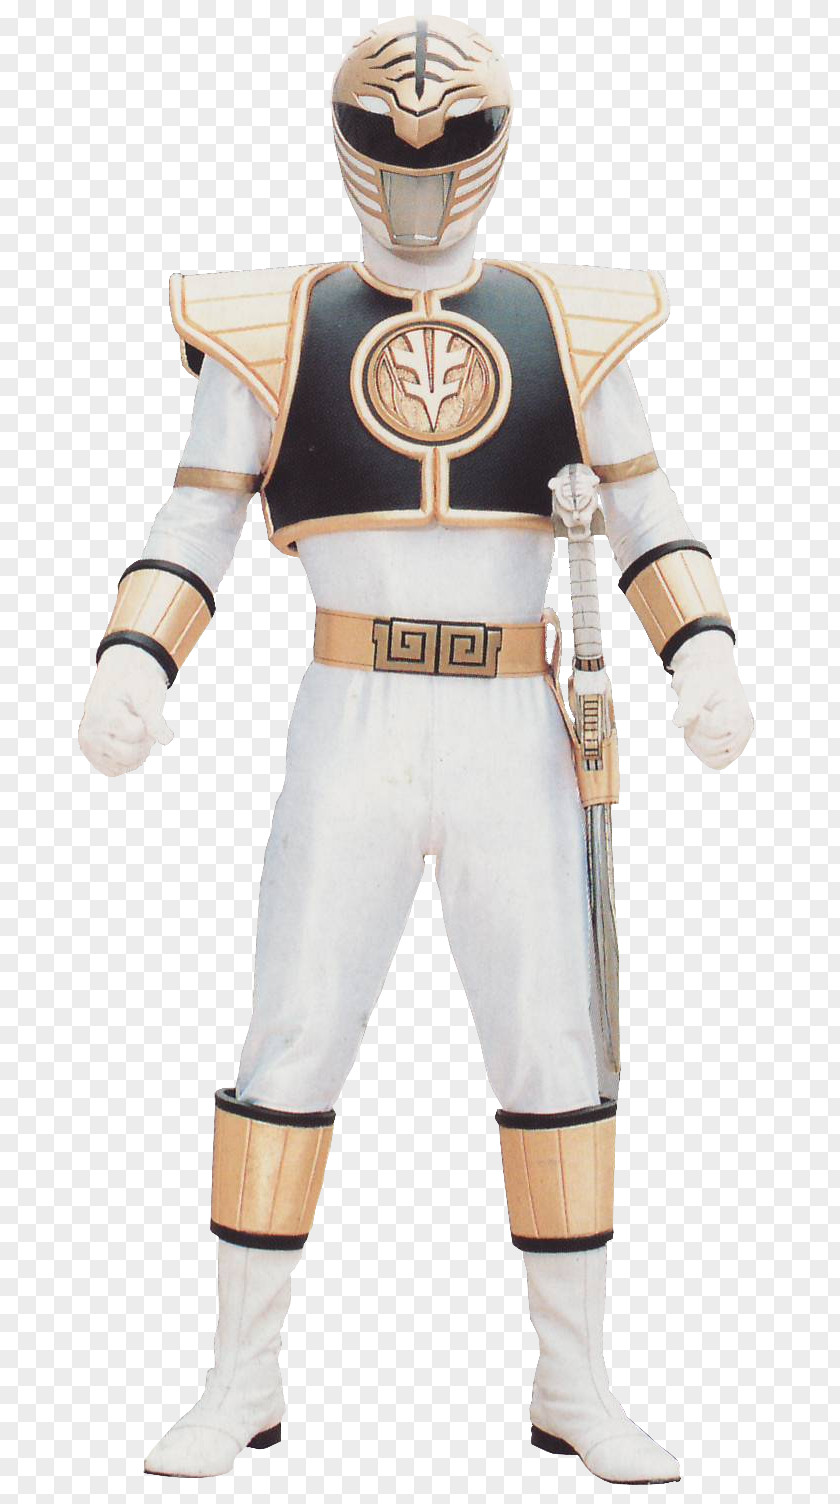 Power Rangers Tommy Oliver Kimberly Hart White Ranger Cosplay Costume PNG